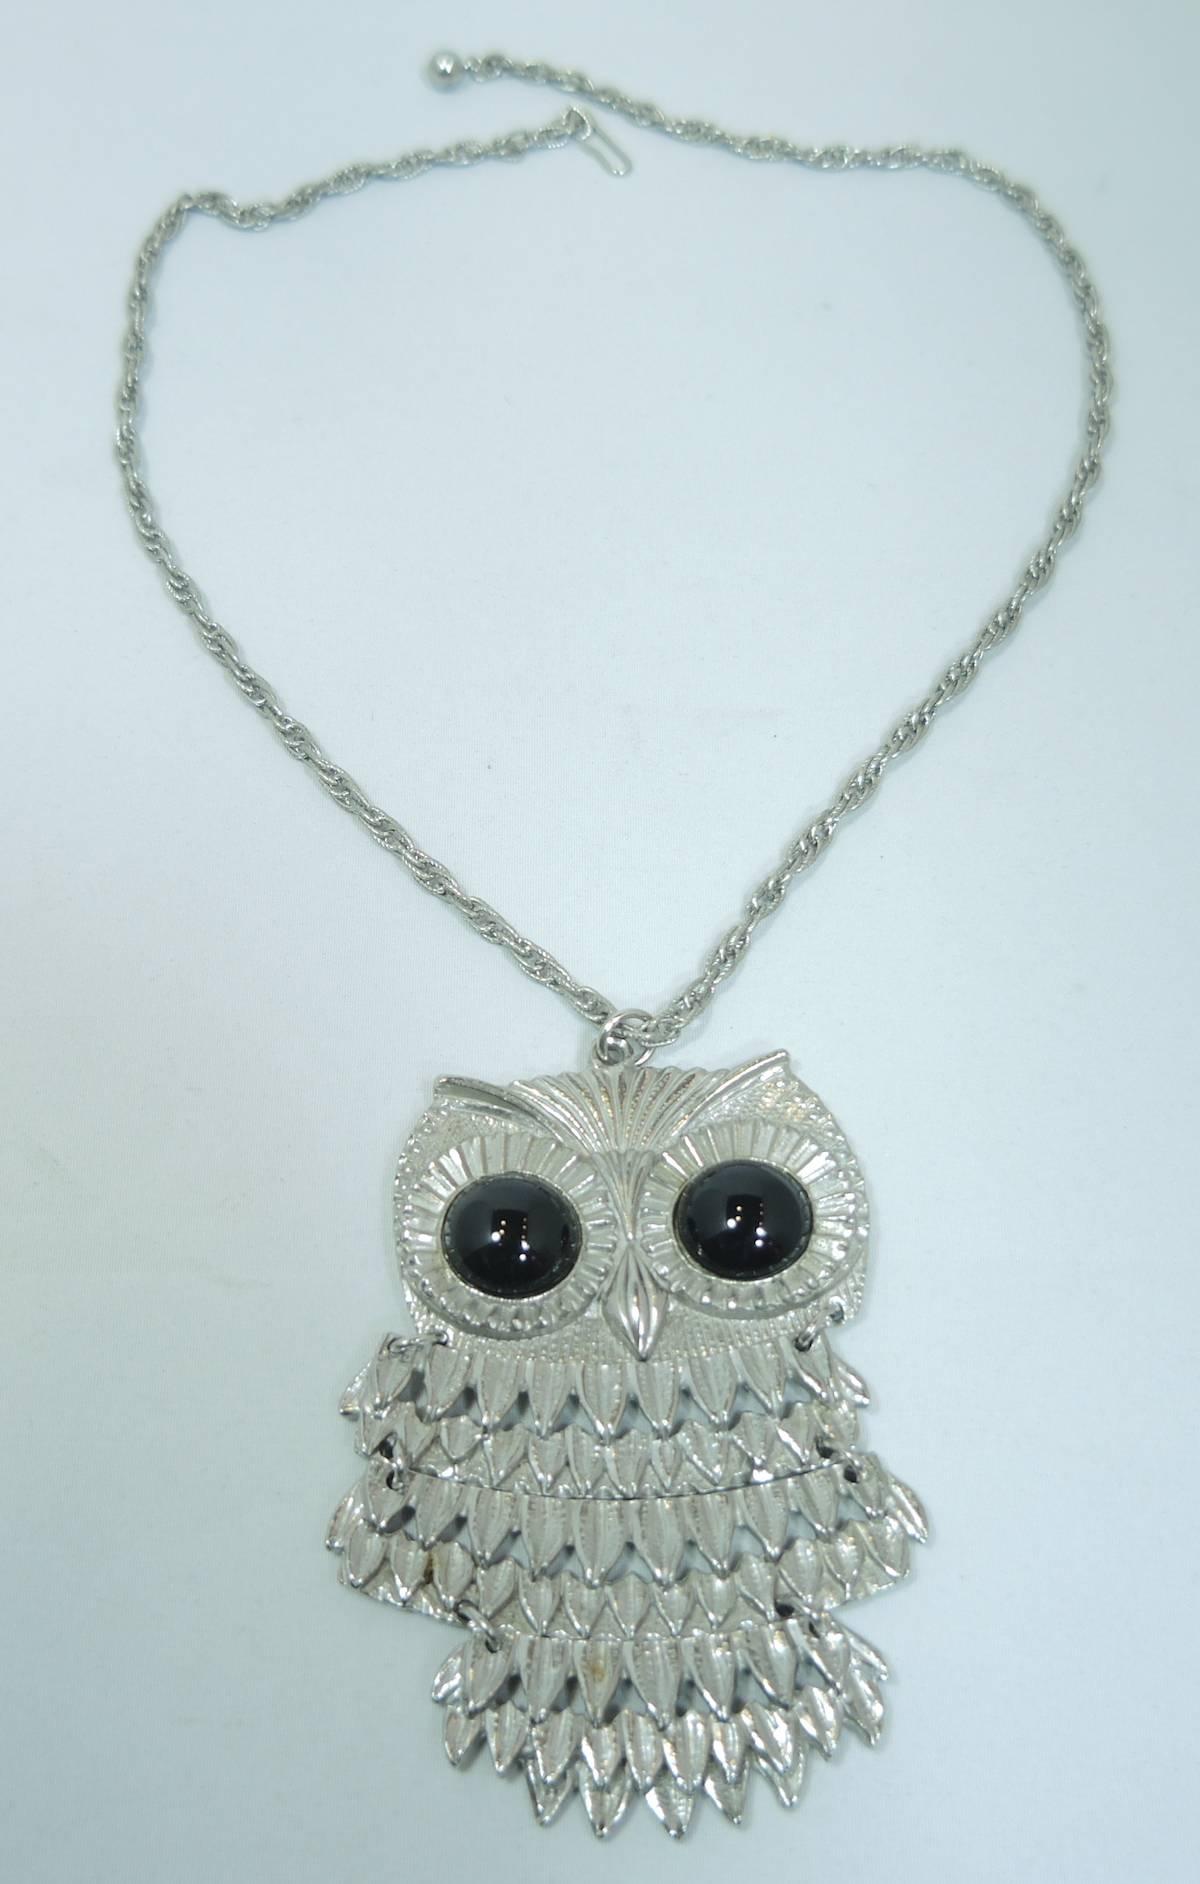 This is a sweet articulated owl pendant necklace that has black glass stones for eyes. This necklace measures 21” and the pendant measures 3-3/4” x 2-1/4”. It has a hook closure and is signed “Goldette” and is in excellent condition.